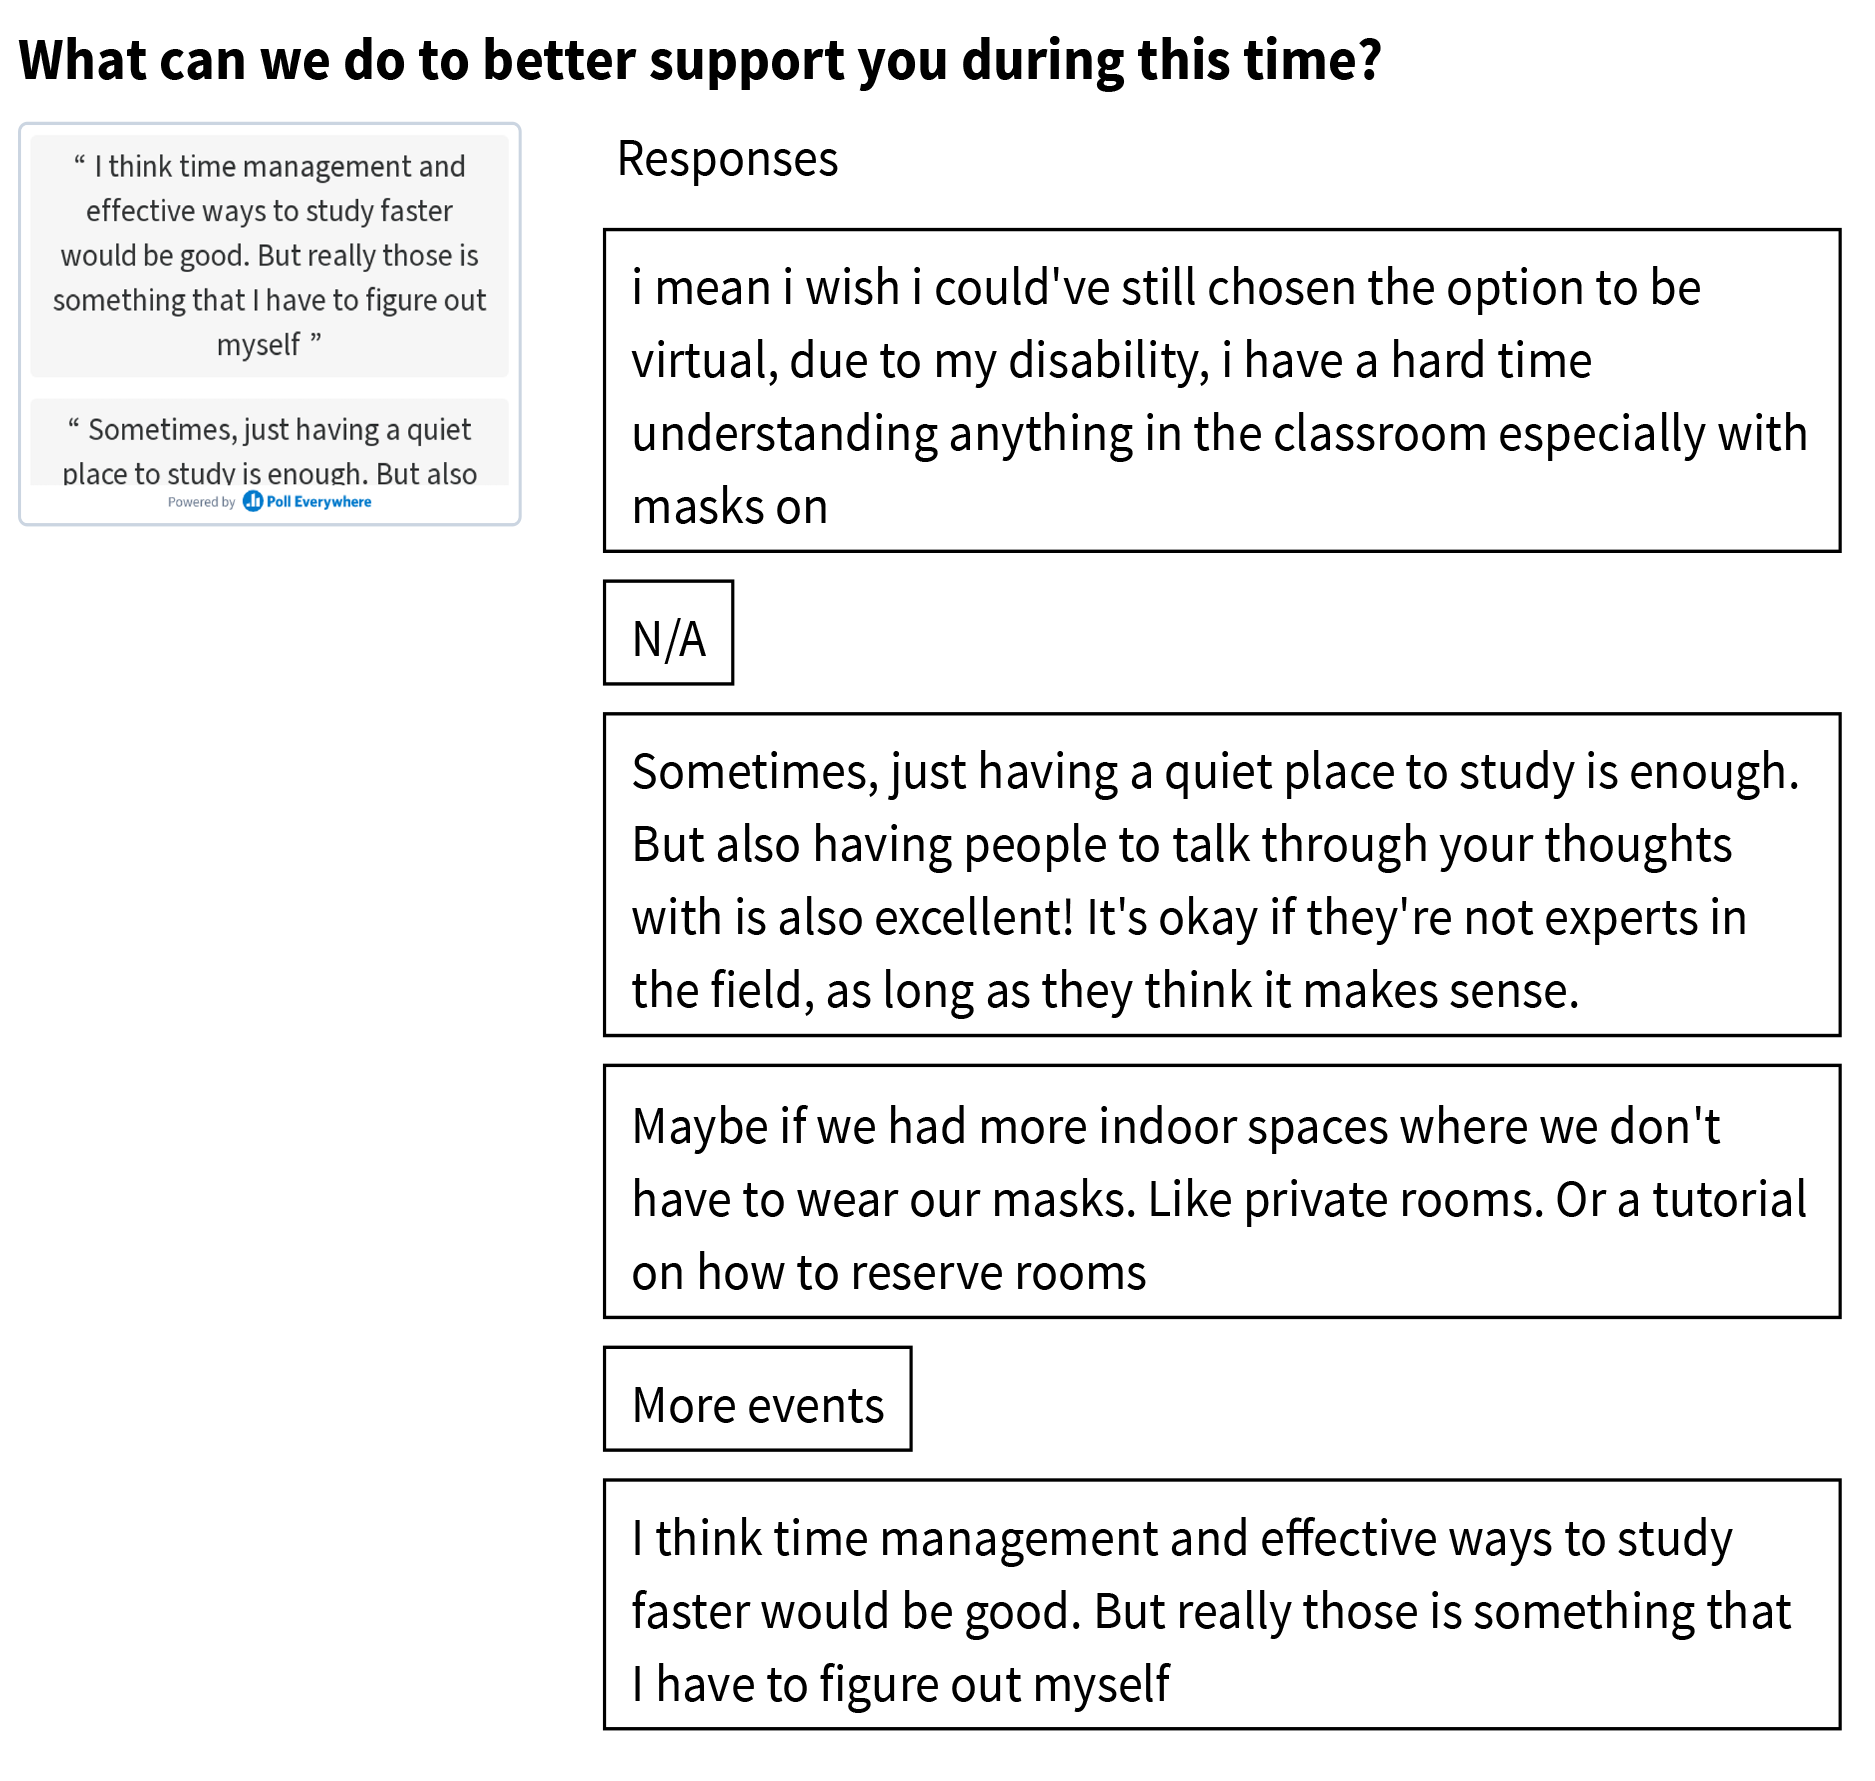 student responses to "what can we do to better support you?"